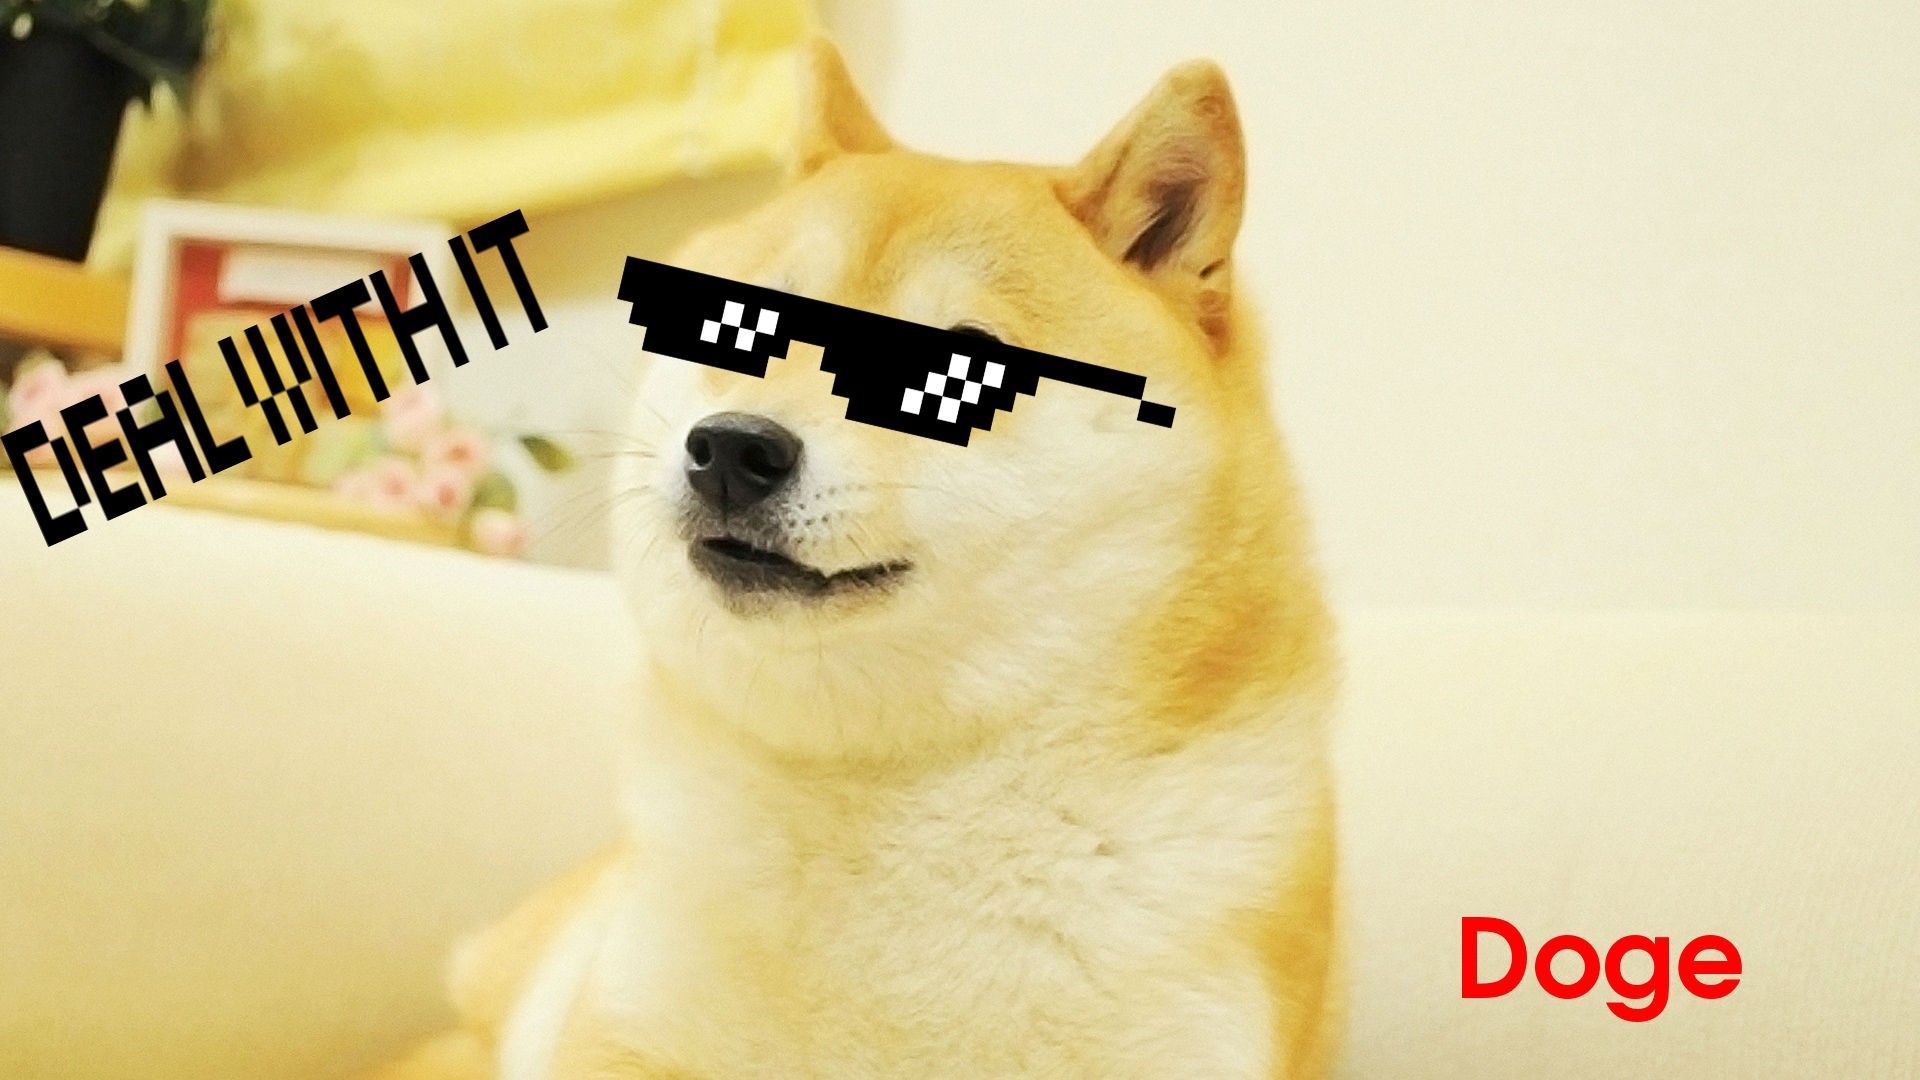 Win 2 ETH by Disguising a Cat as a Doge